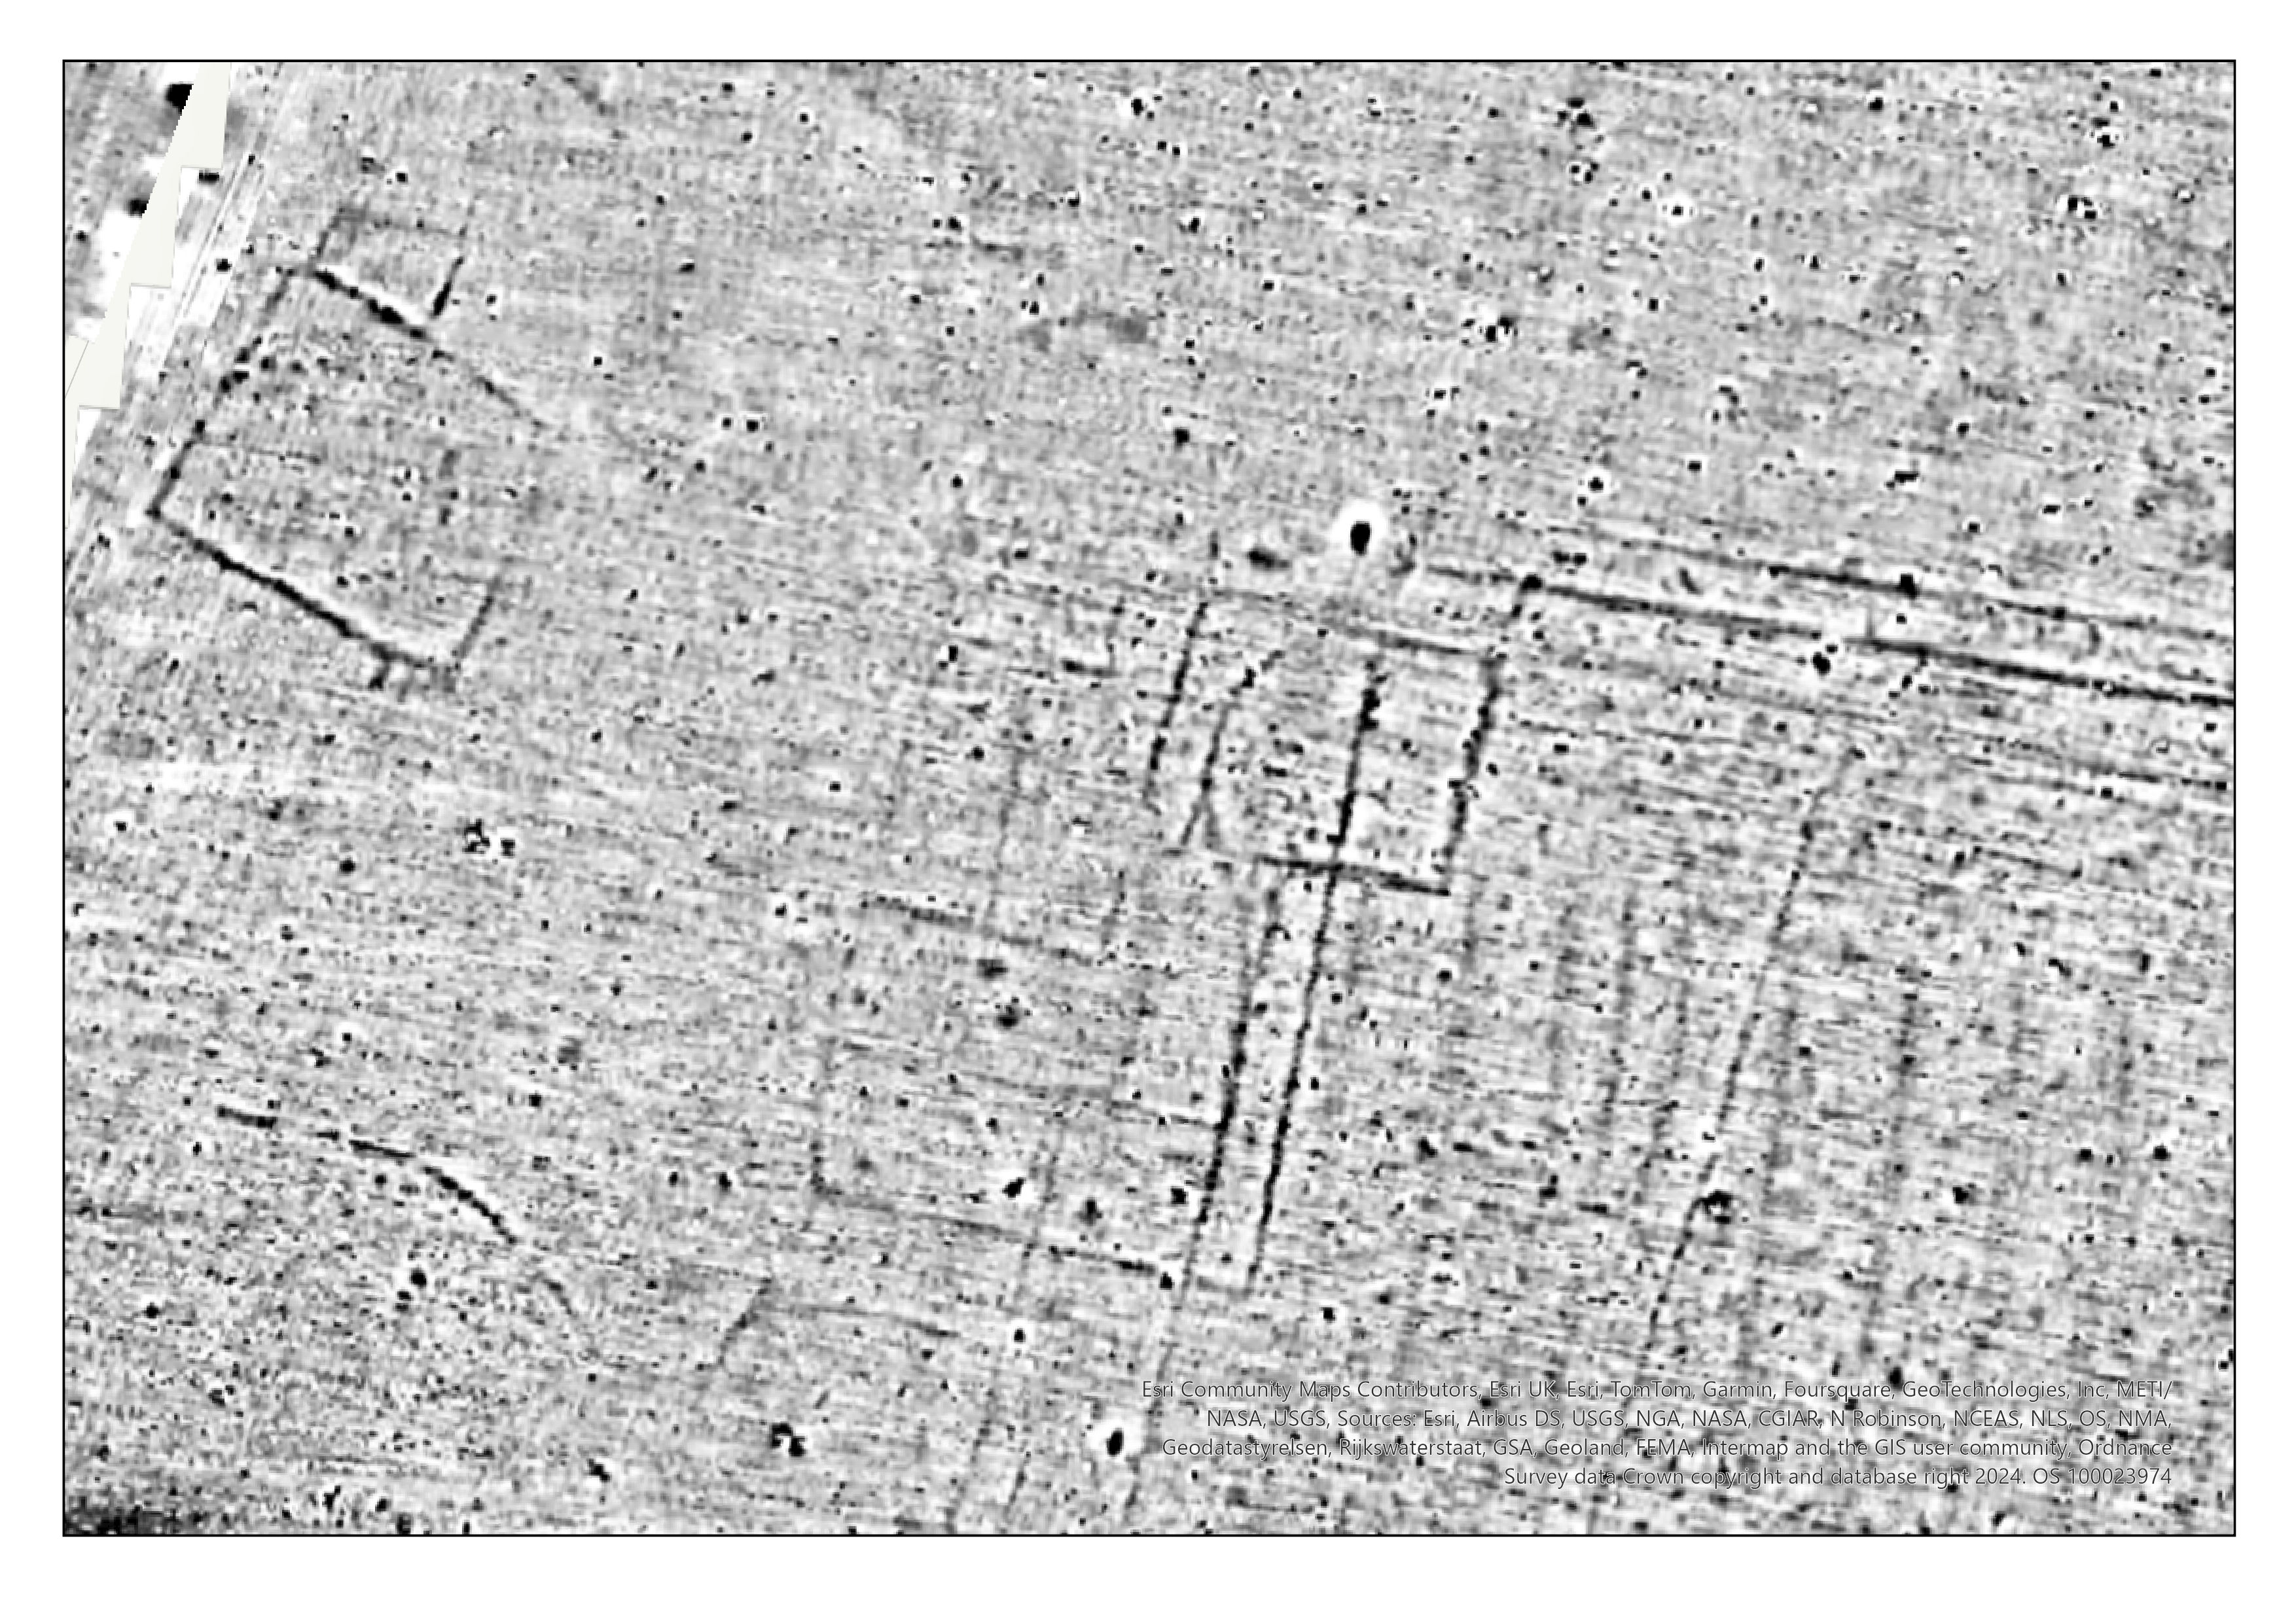 Image of grey scale geophysics data with darker lines and areas showing the site of possible Roman villa